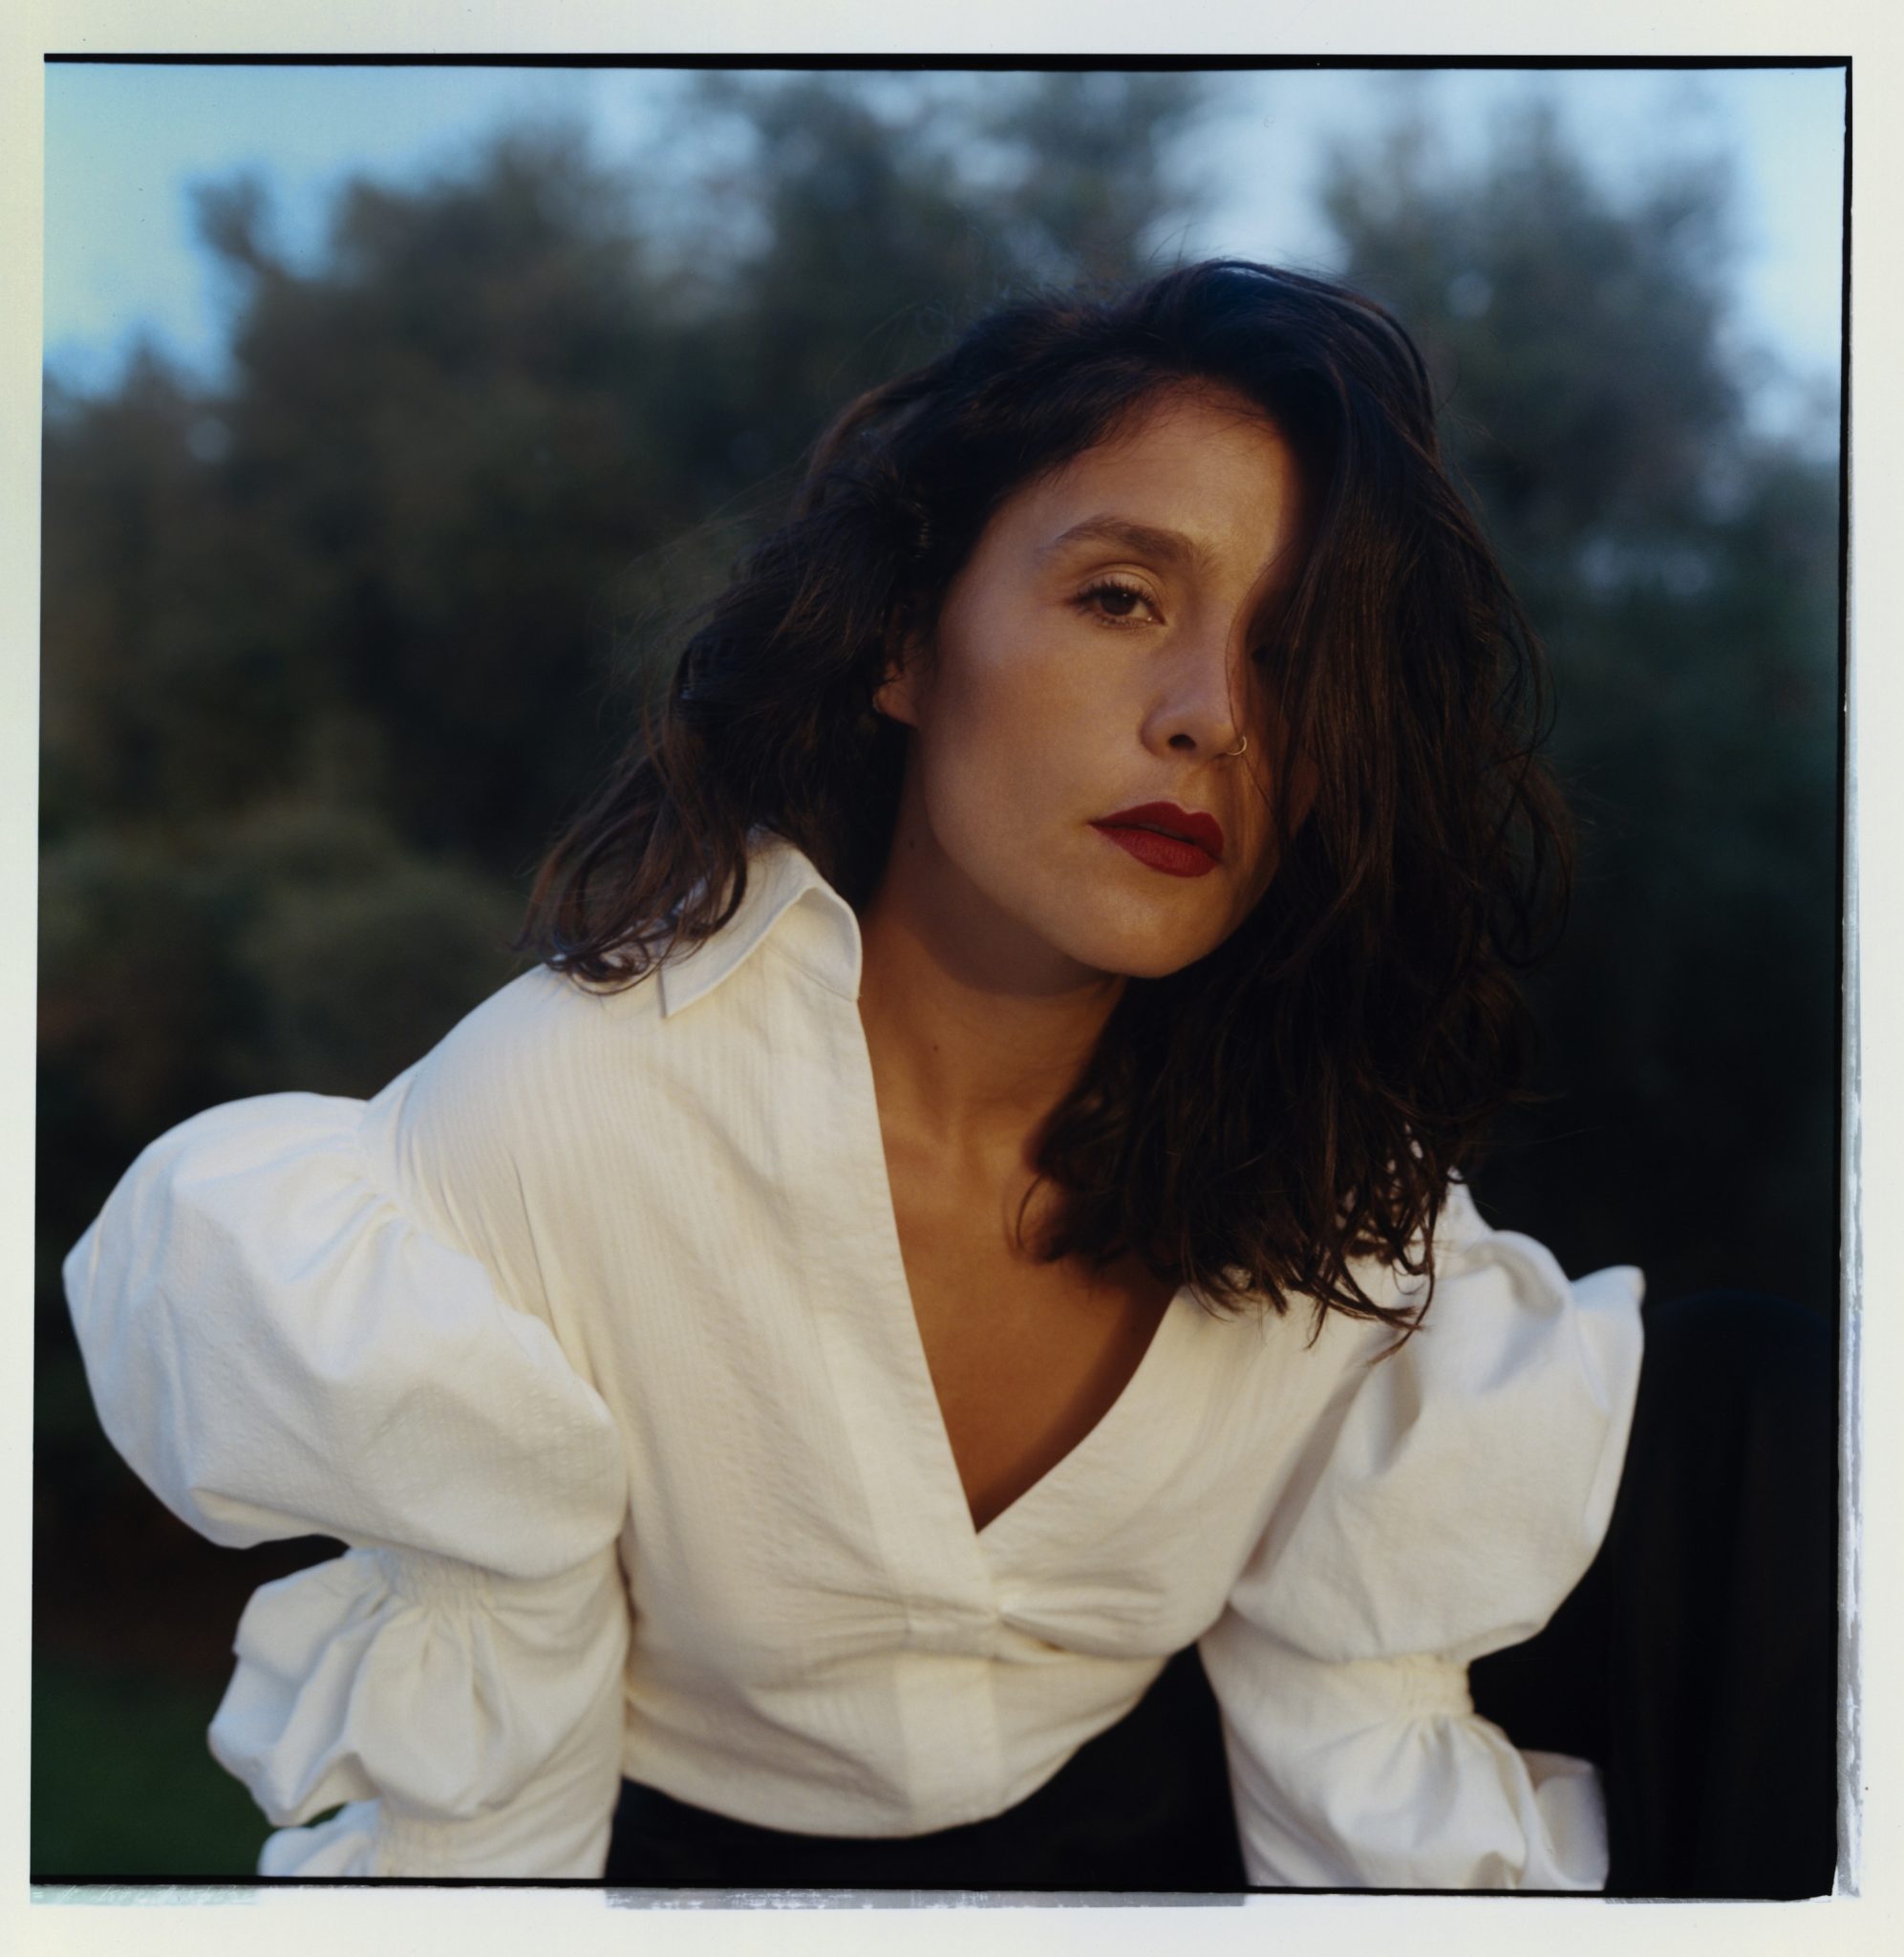 Jessie Ware explains why she dreams of being an effortless host